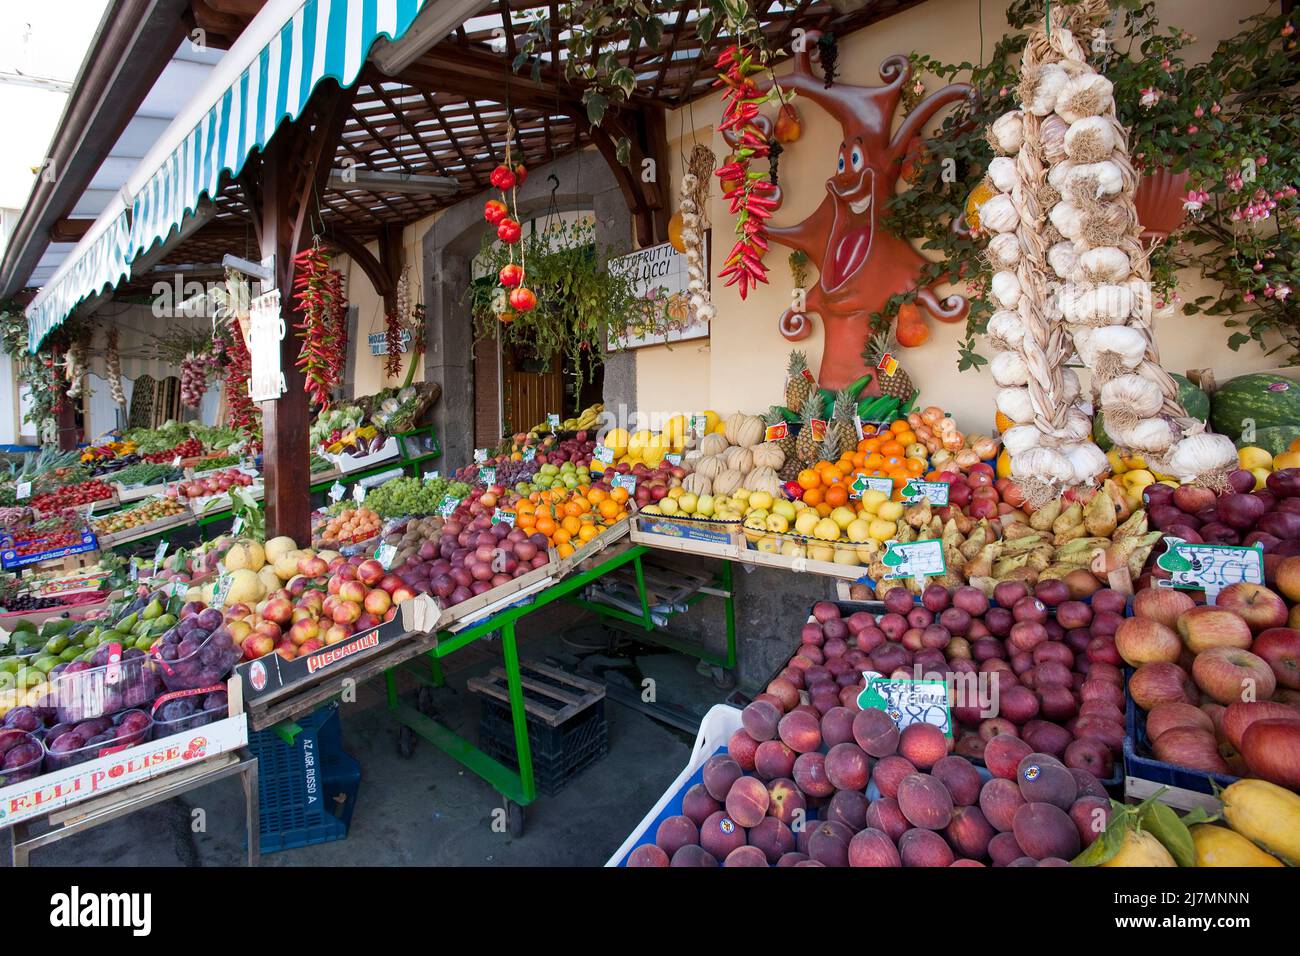 Vegetable and fruit shop at the old town of Ischia island, Gulf of Neapel, Italy, Mediterranean Sea, Europe Stock Photo